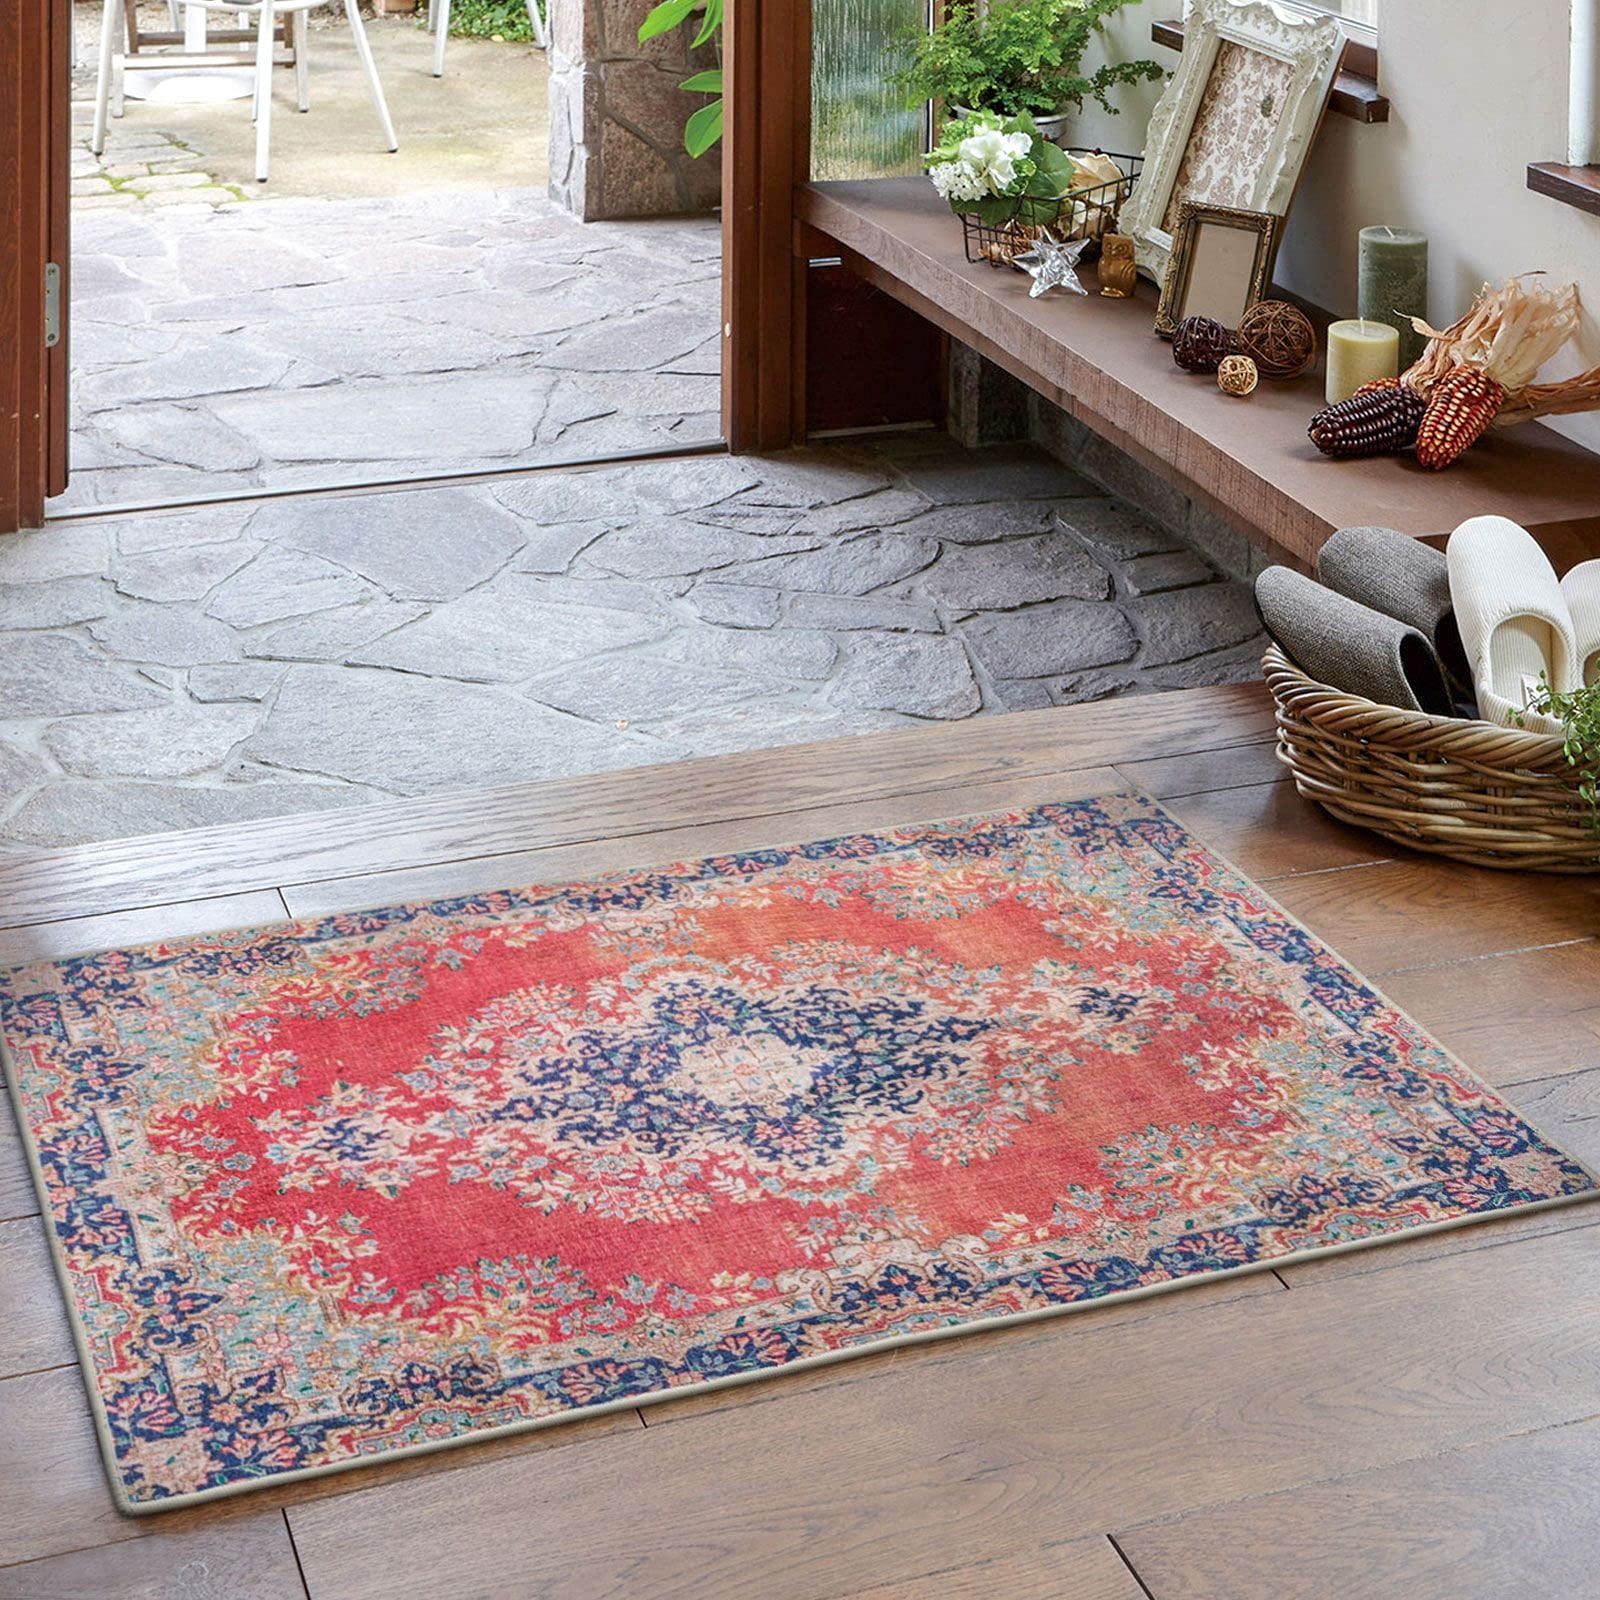 Wxnzsl Boho Vintage Rug 2x3 Persian Washable Non Slip Rug, Small Low-Pile Entryway Rug for Bedroom Living Room - Red